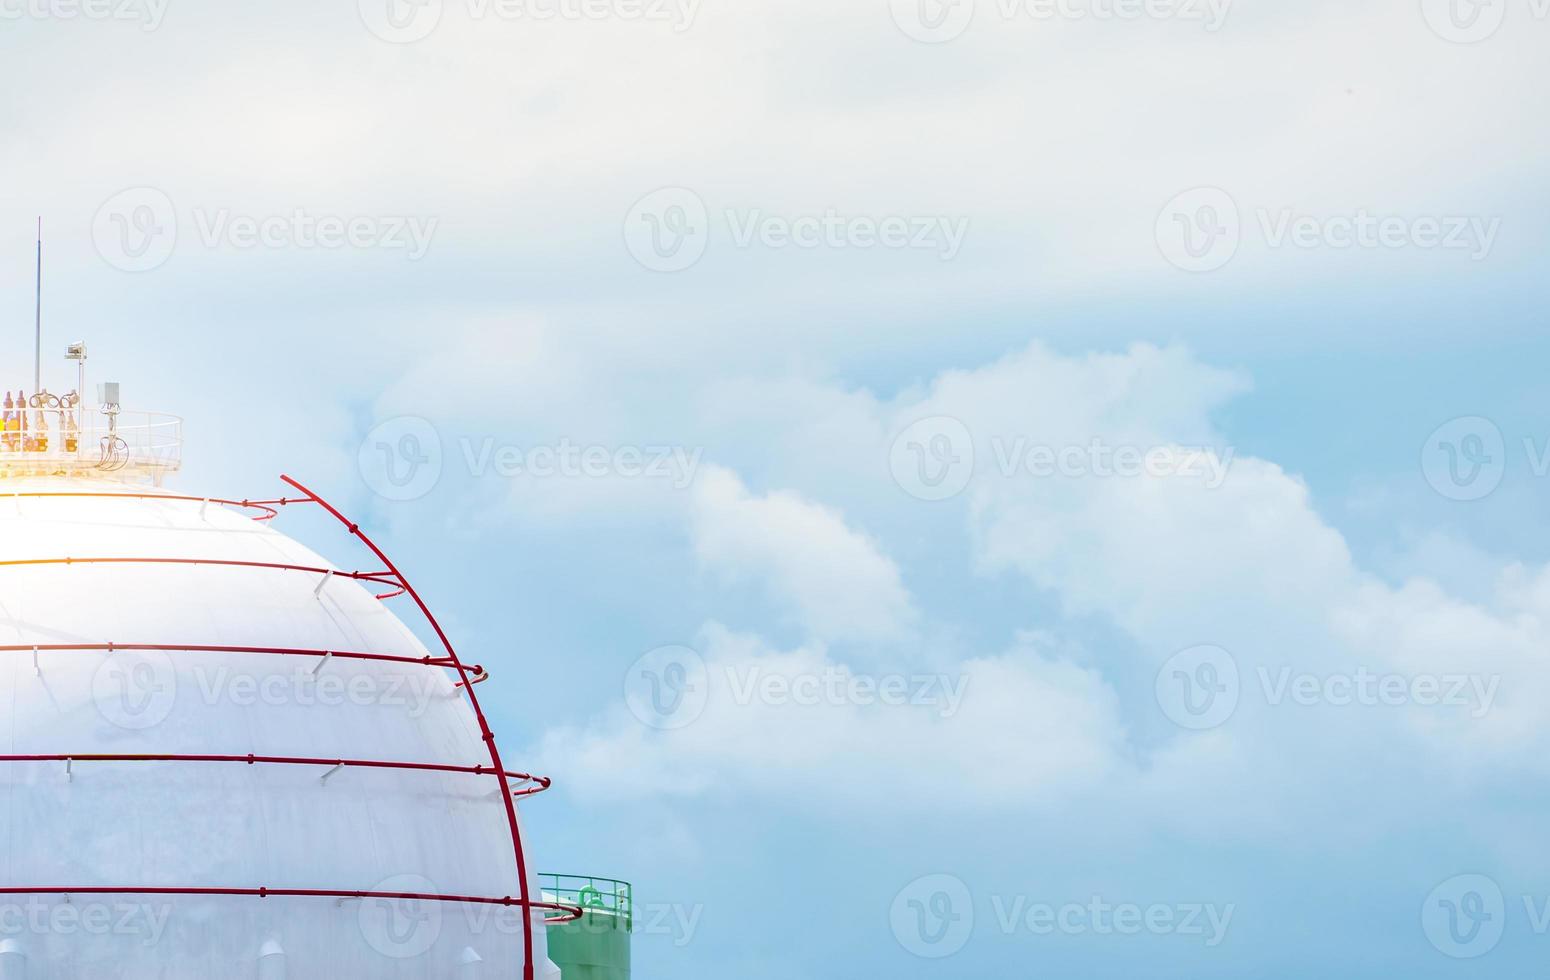 Industrial gas storage tank. LNG or liquefied natural gas storage tank. Spherical gas tank in petroleum refinery. Above-ground storage tank. Natural gas storage industry and global market consumption photo